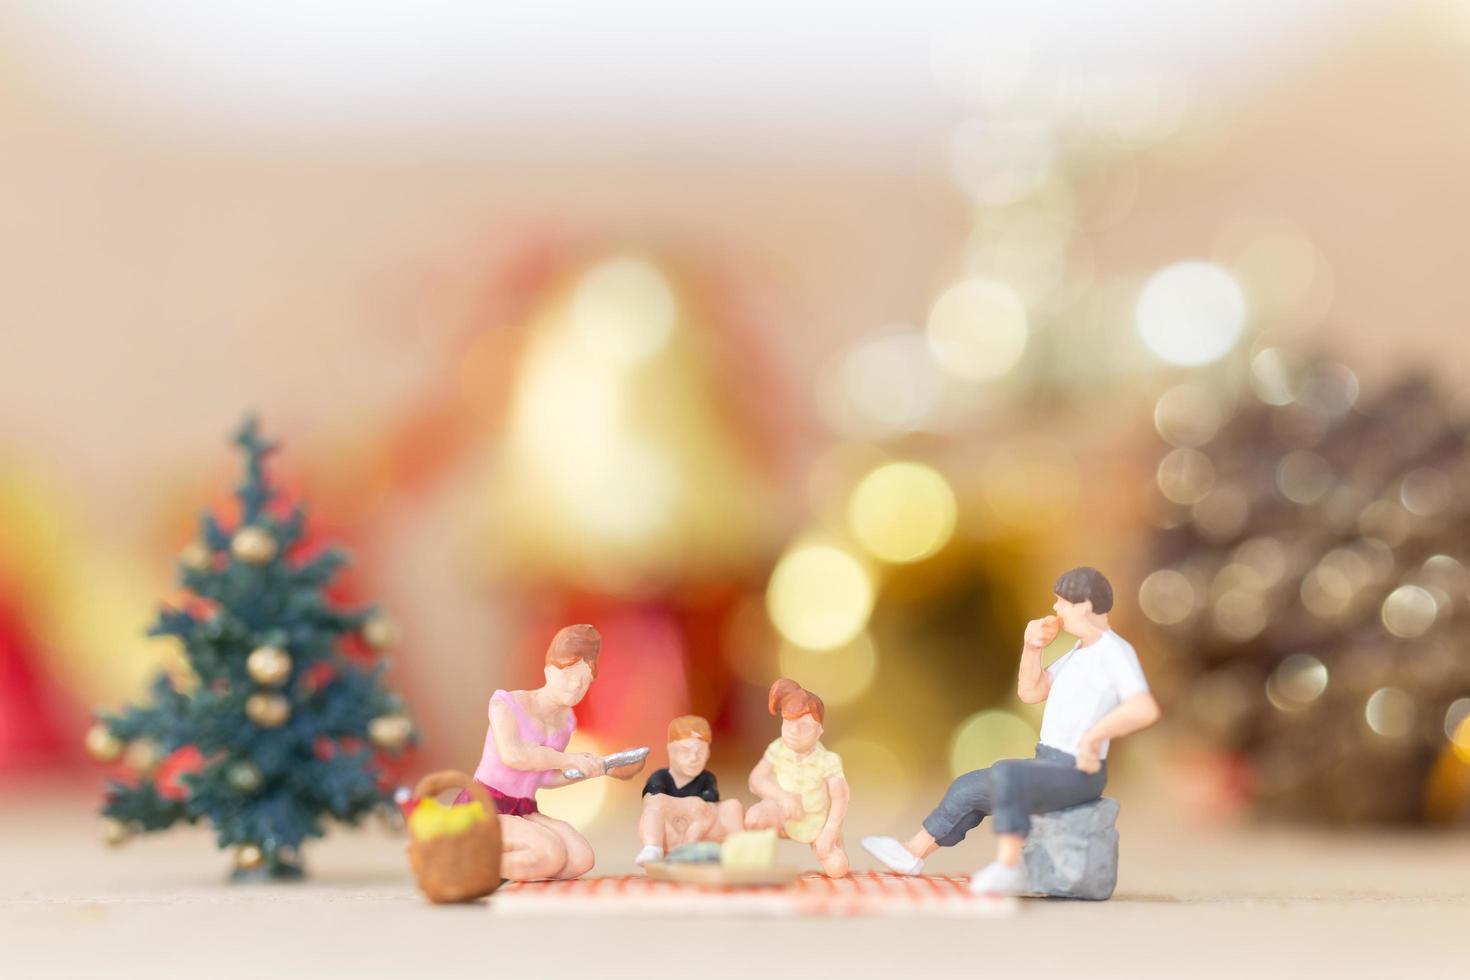 Miniature figurines of a family at Christmas time photo